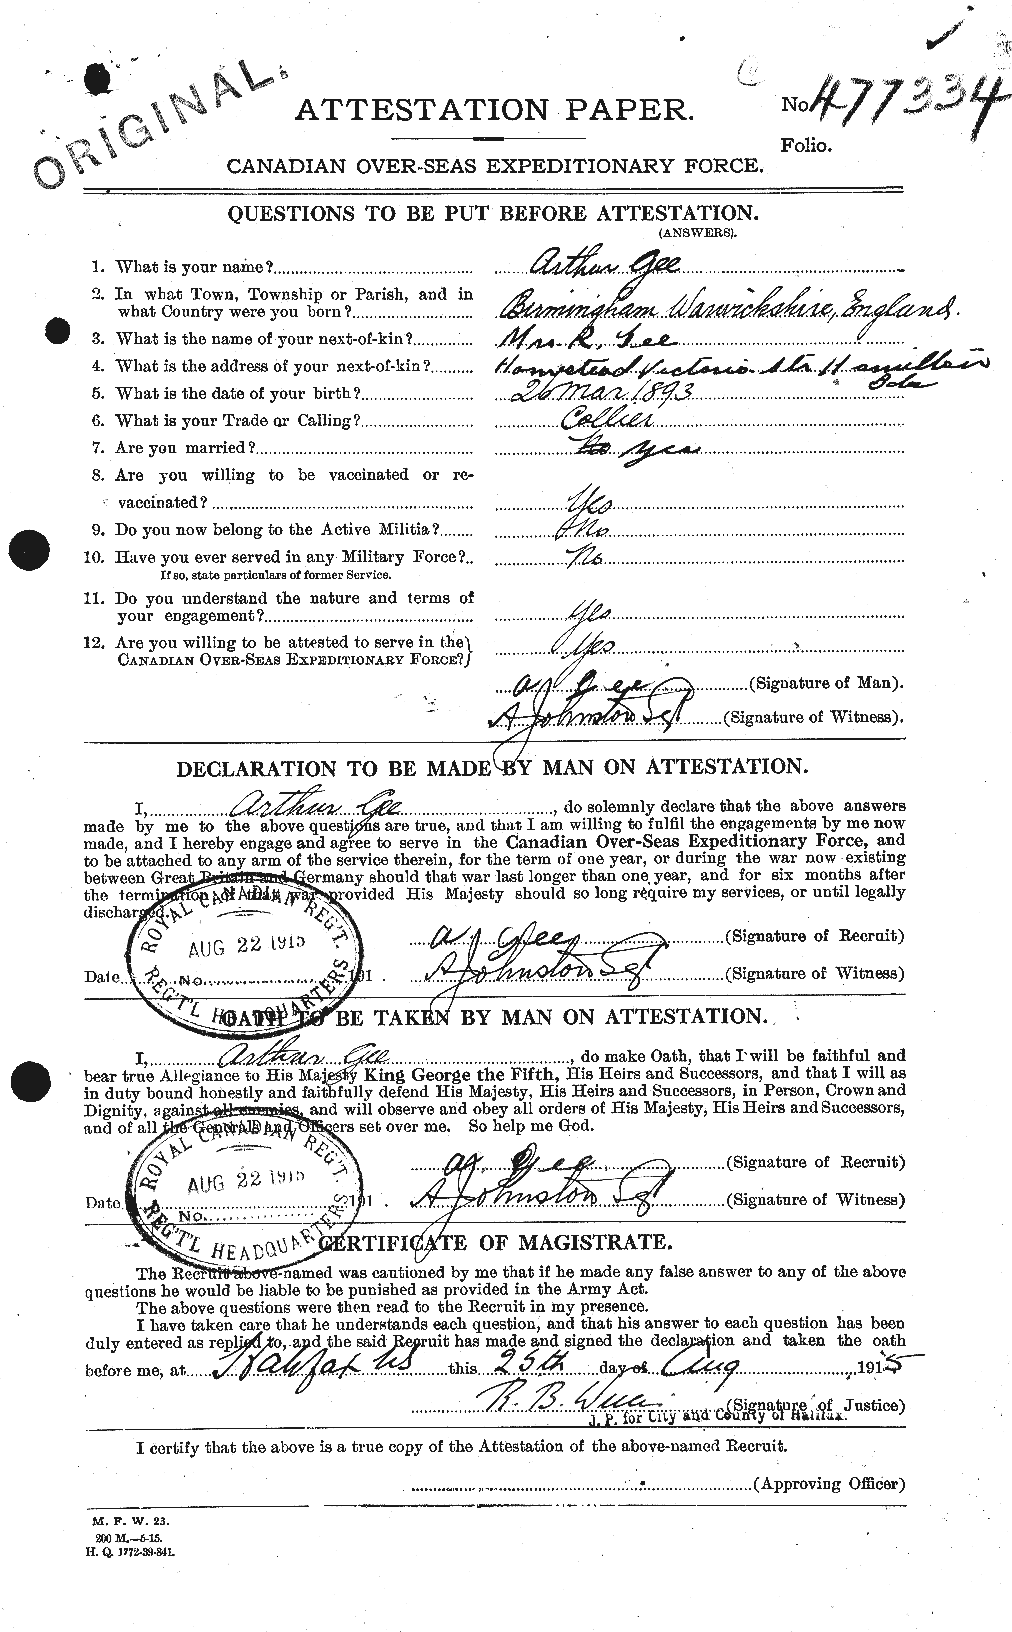 Personnel Records of the First World War - CEF 346837a